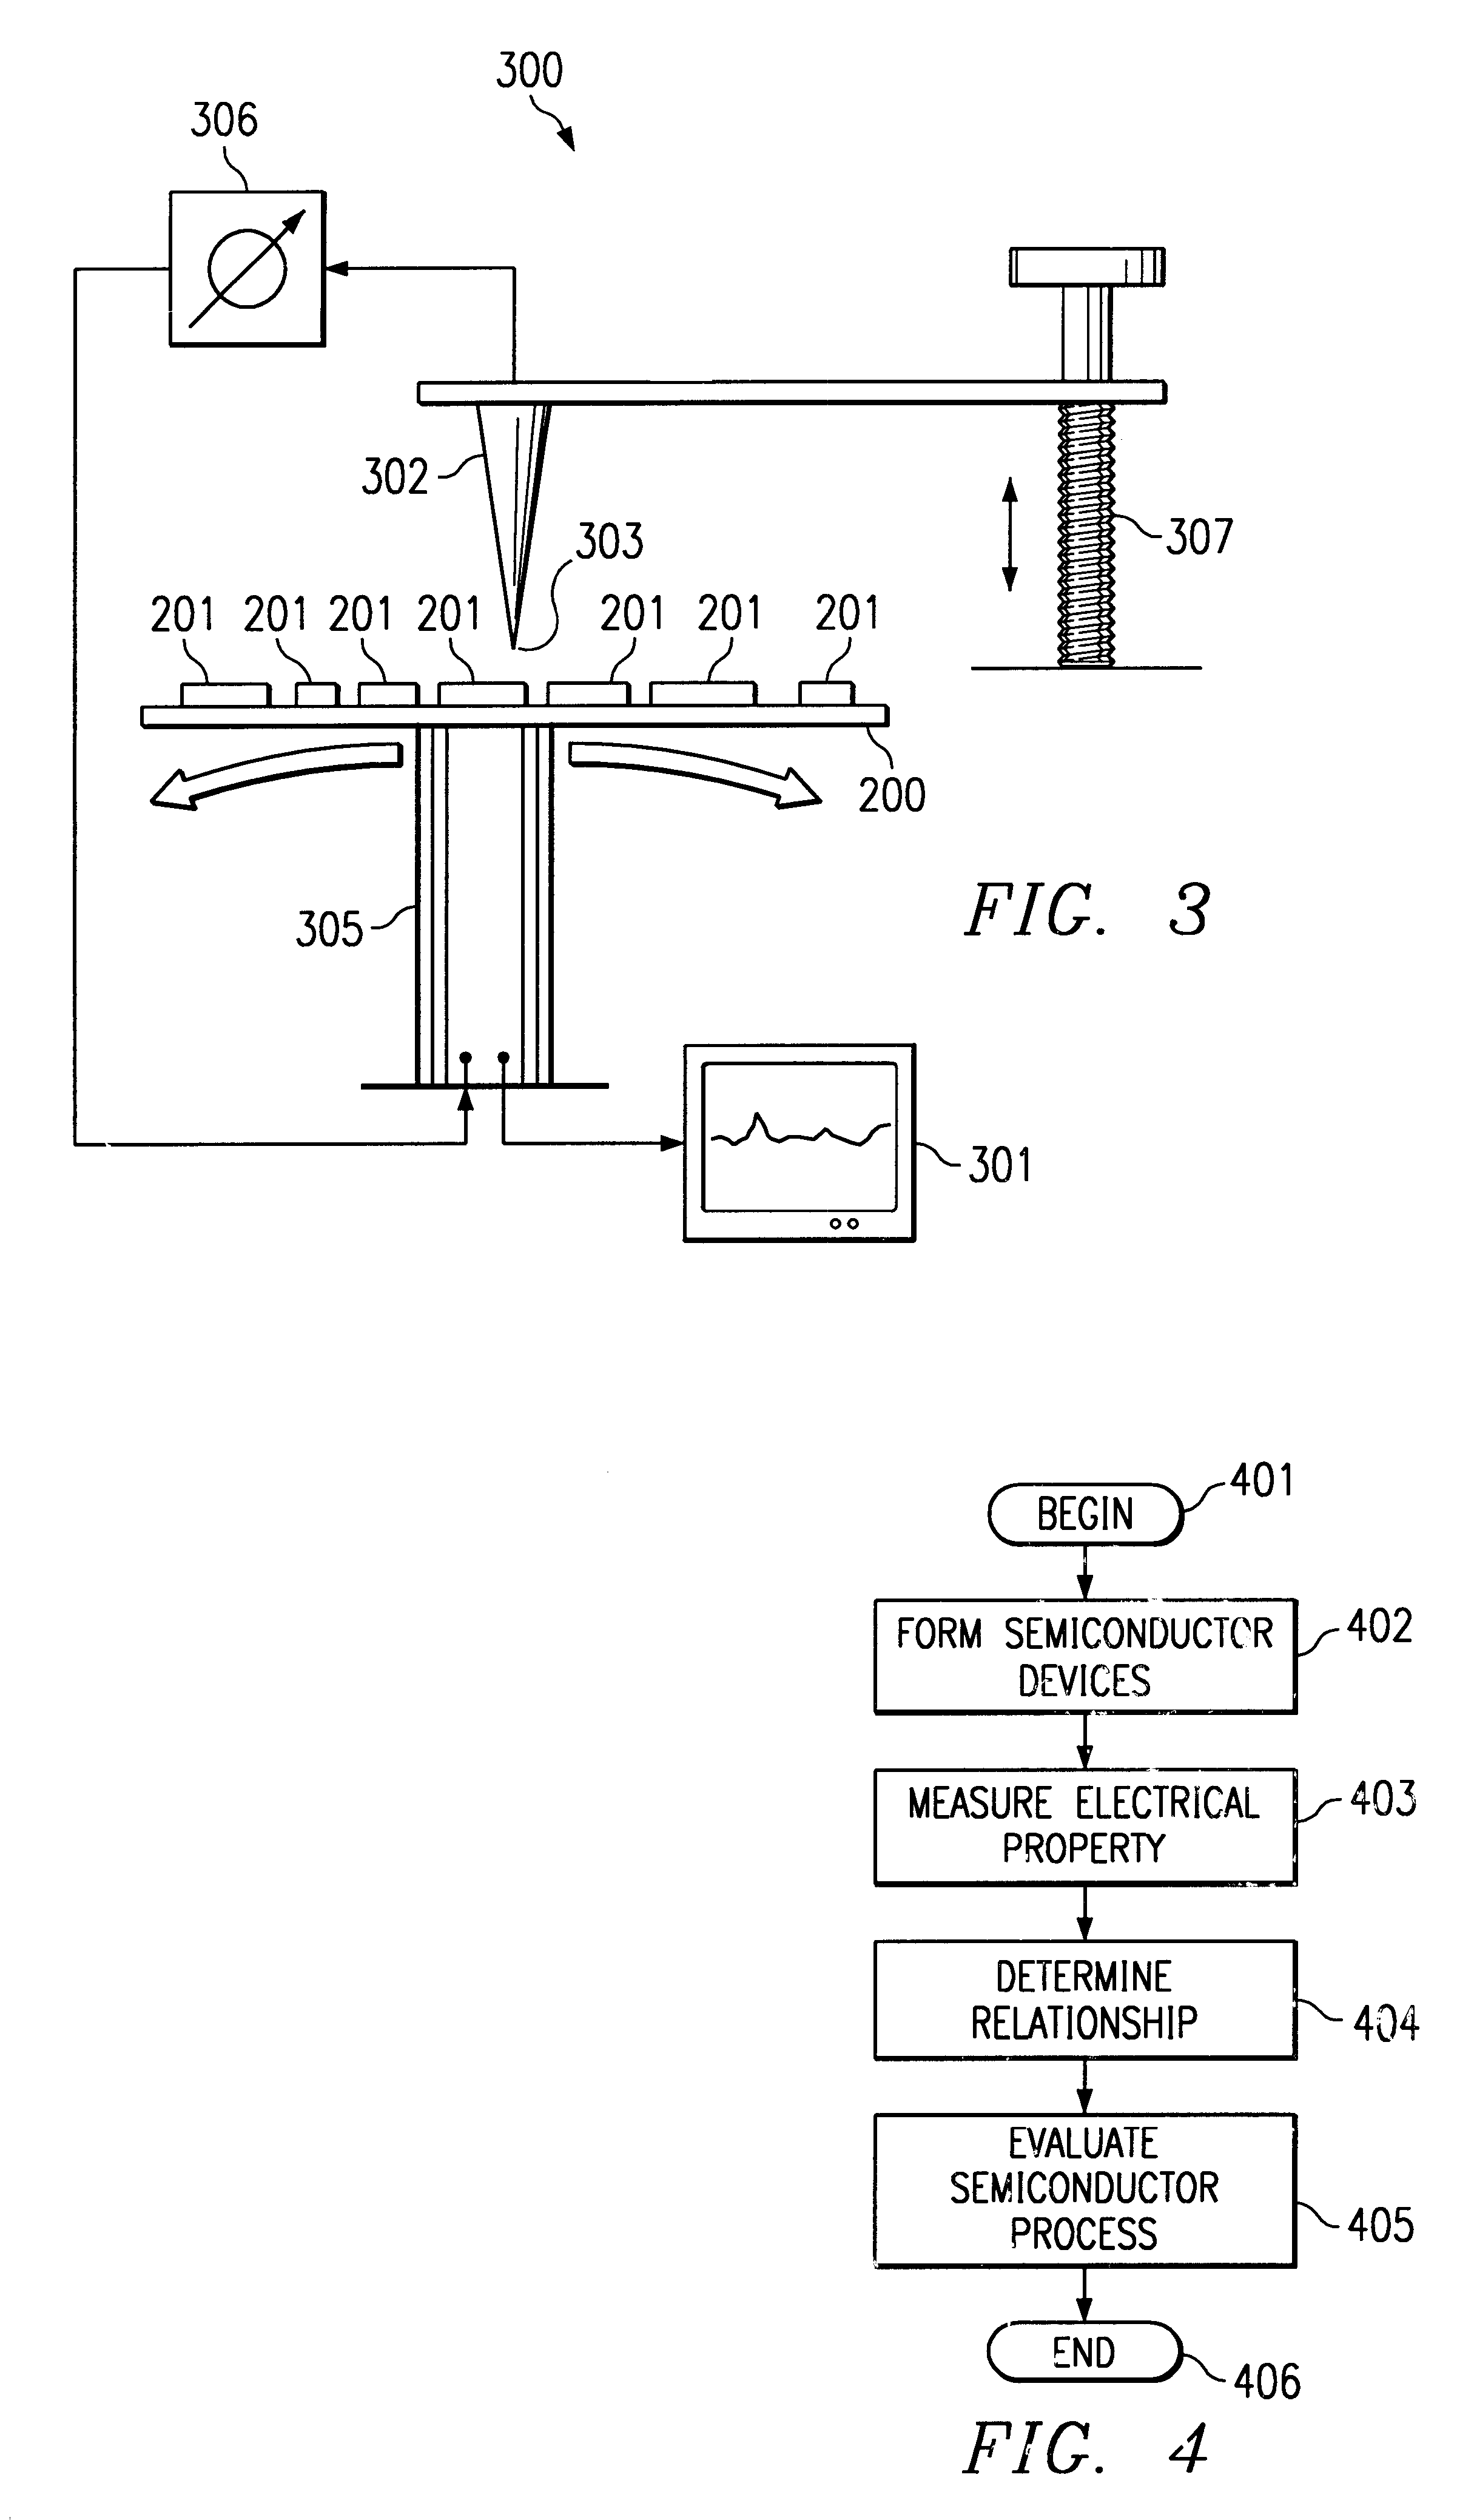 Apparatus and method for evaluating semiconductor structures and devices